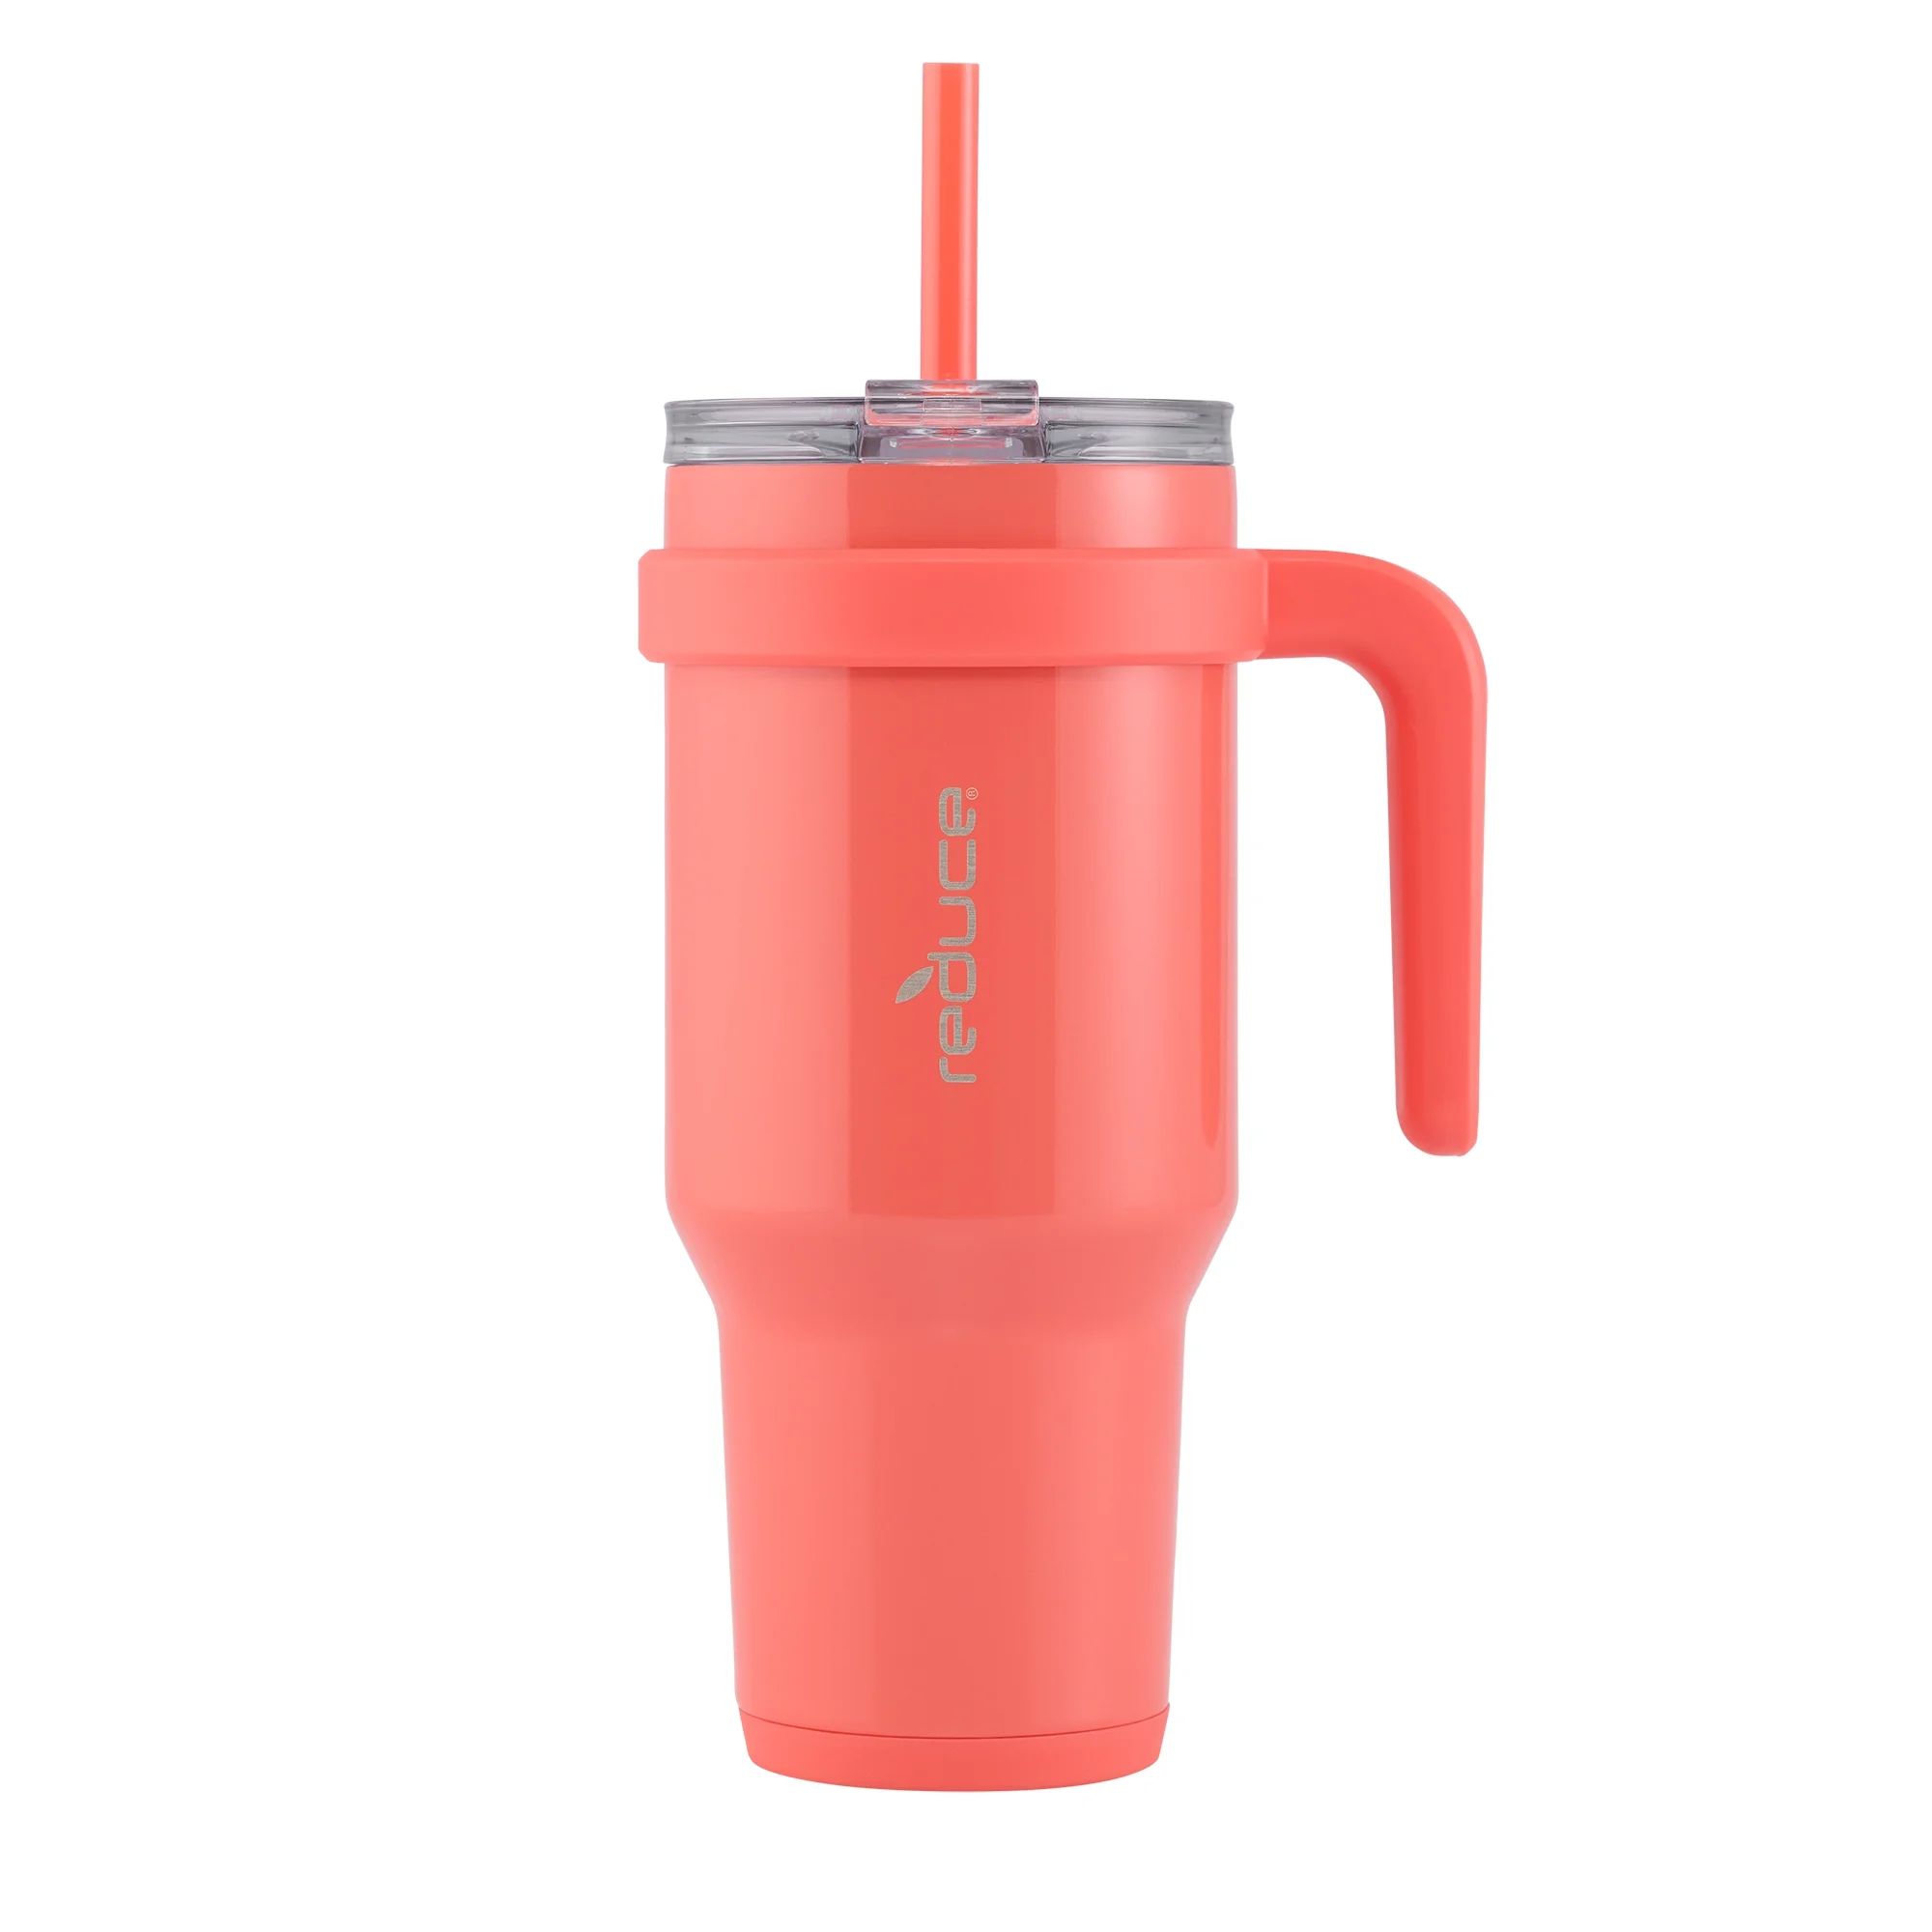 Reduce Slim Cold1 Tumbler - Straw, Lid & Handle. Insulated Stainless Steel 40oz, Pink Coral | Walmart (US)